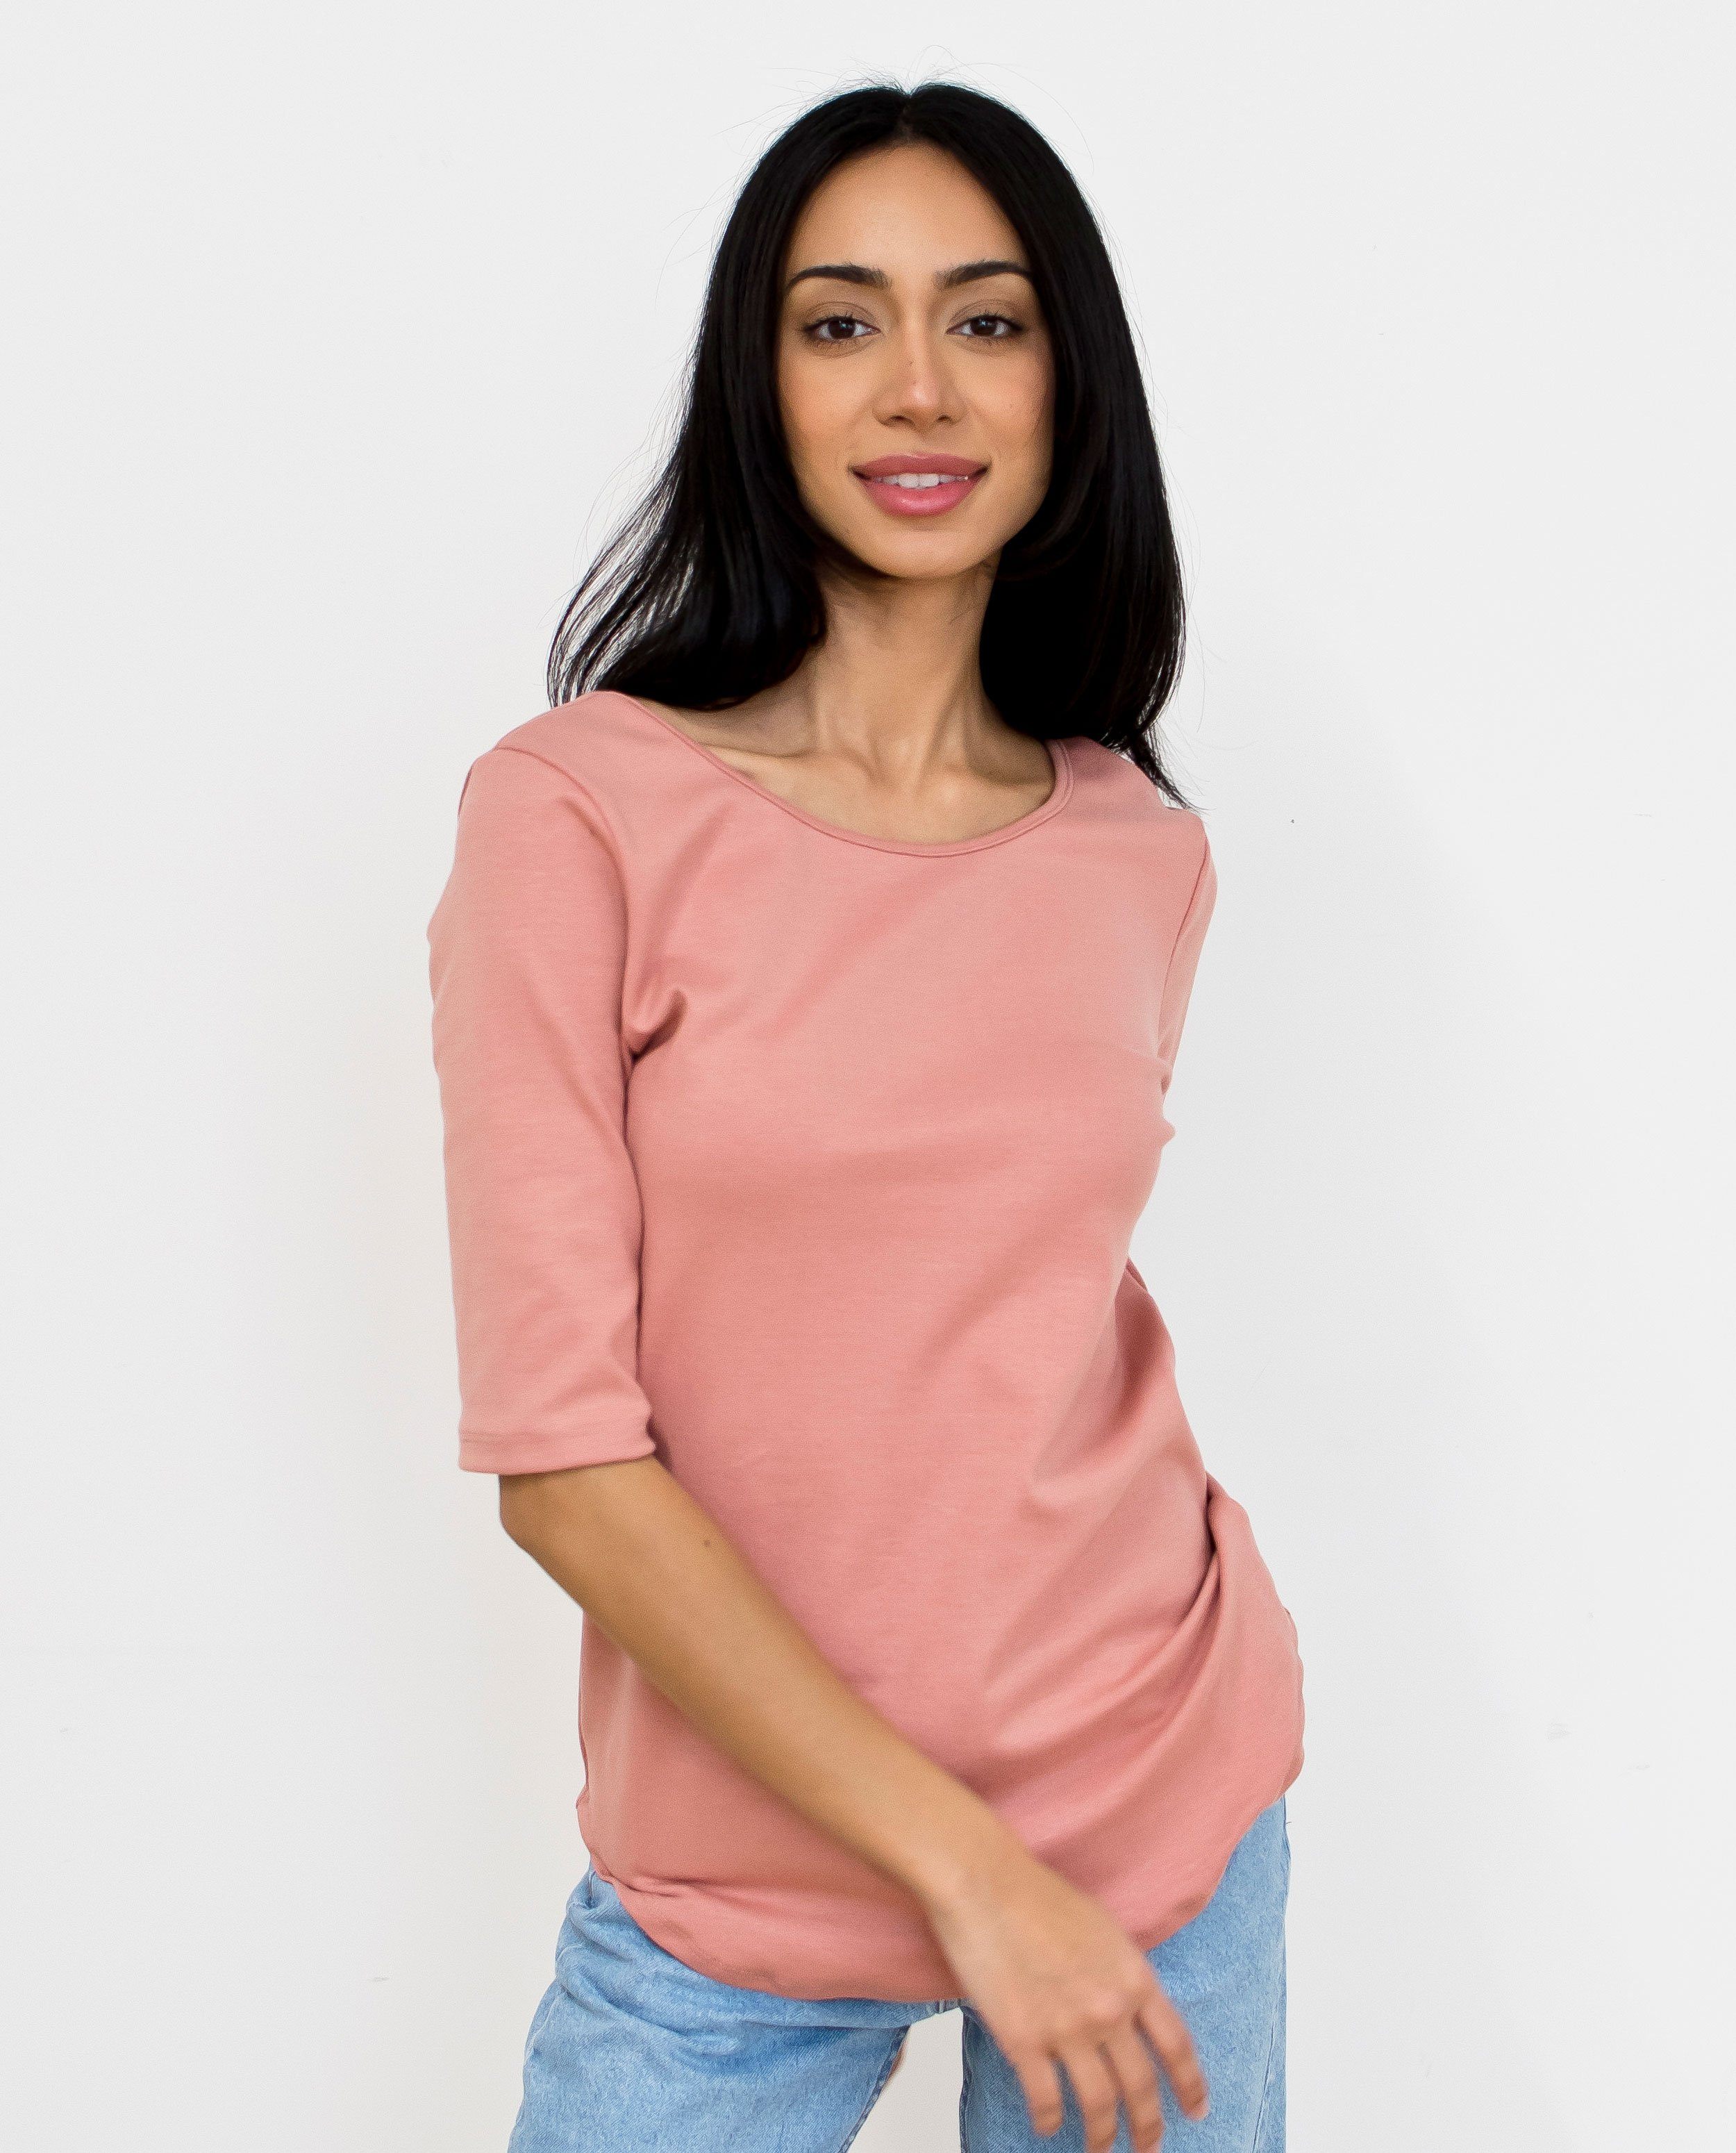 The Sale Ballet Top | FRANC Sustainable Clothing